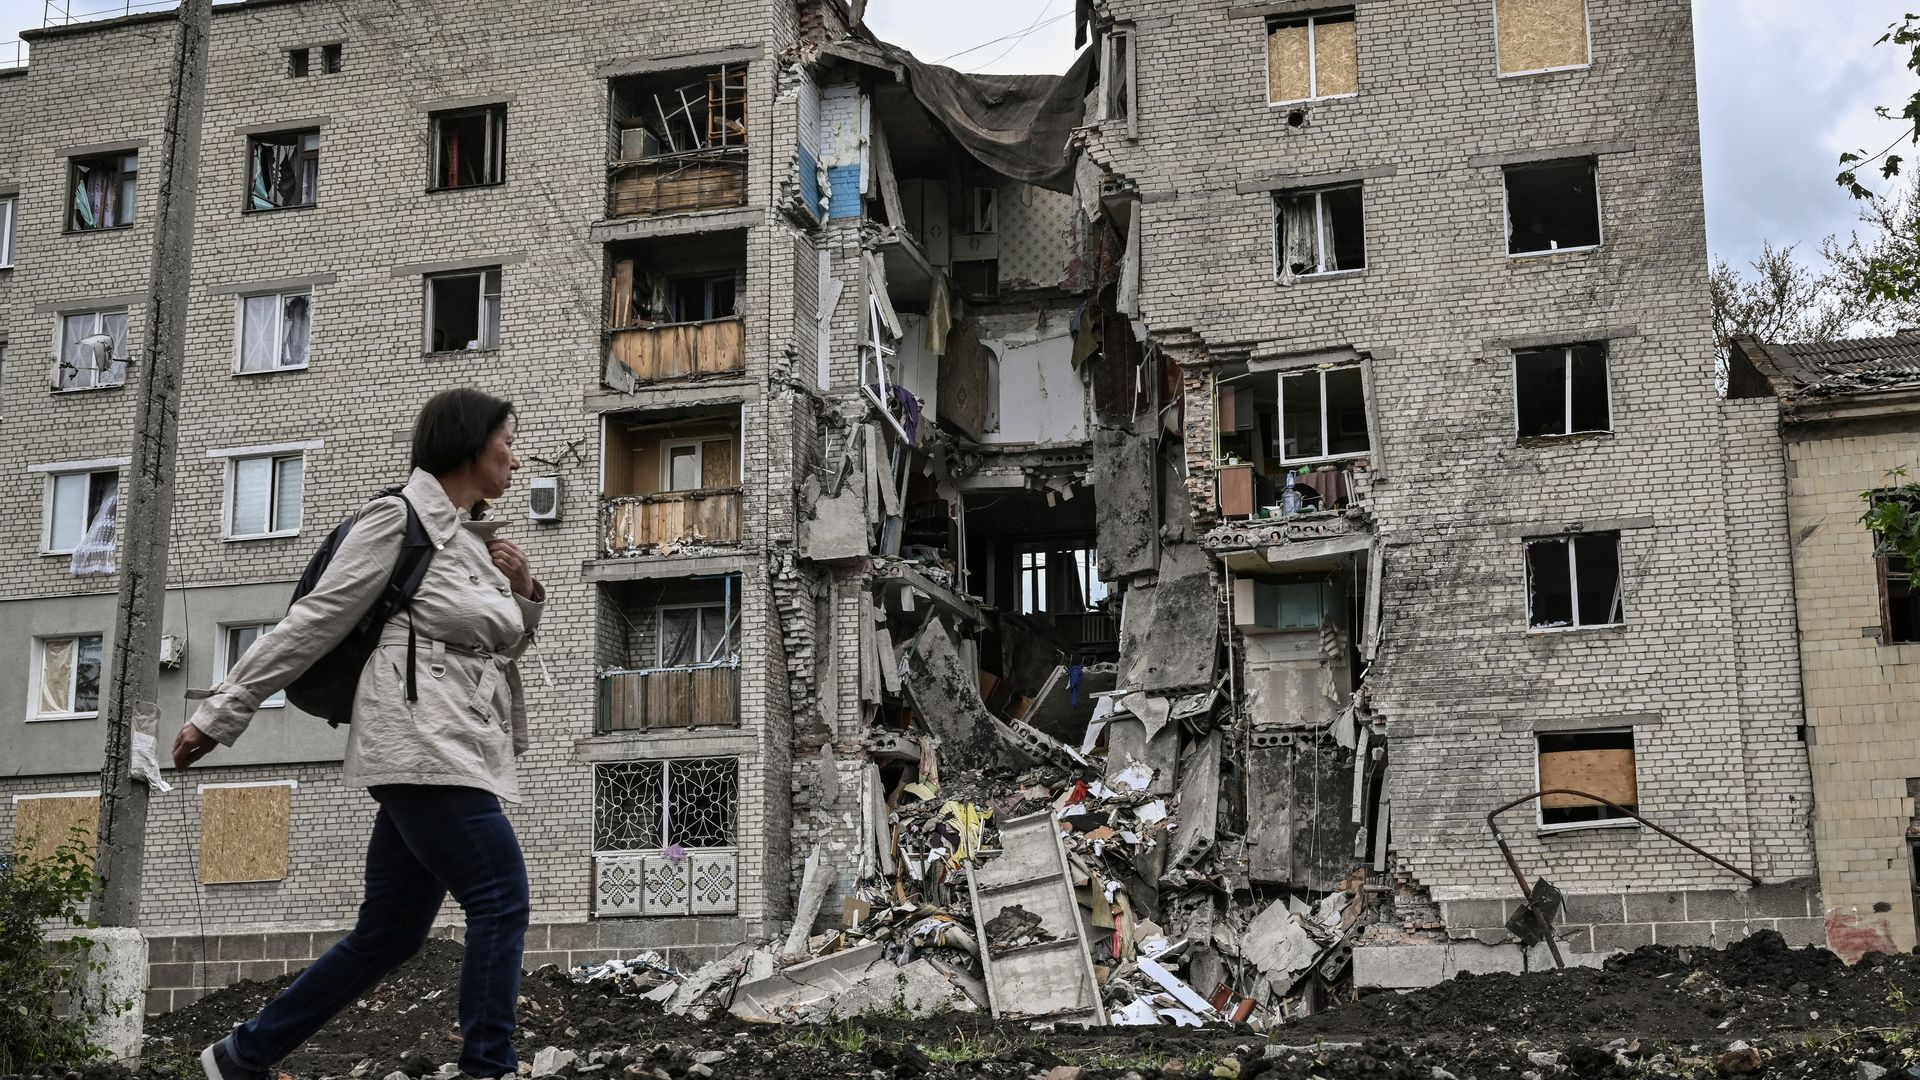 A woman walks by a destroyed apartment building in Bakhmut in the eastern Ukranian region of Donbas on May 22, 2022